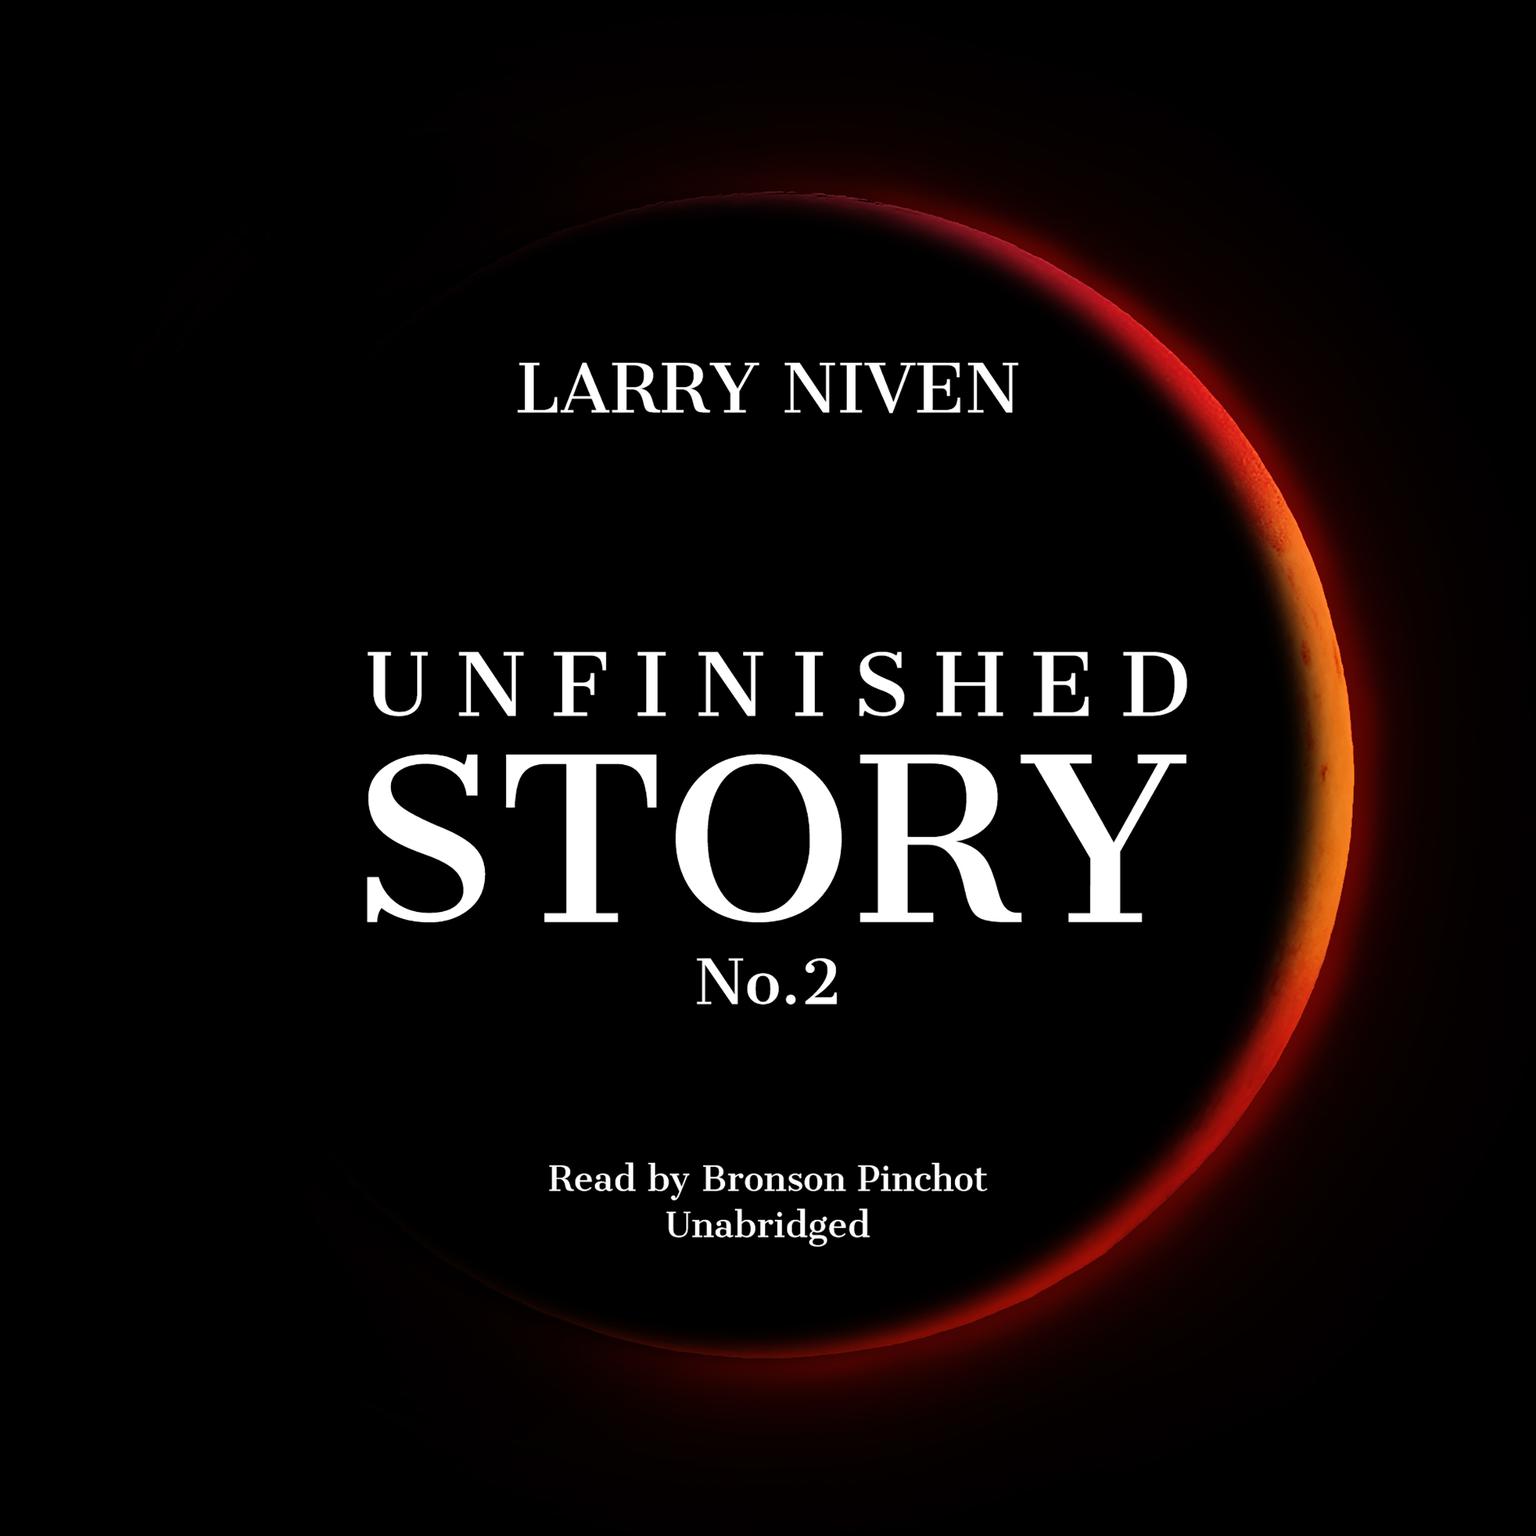 Unfinished Story No. 2 Audiobook, by Larry Niven